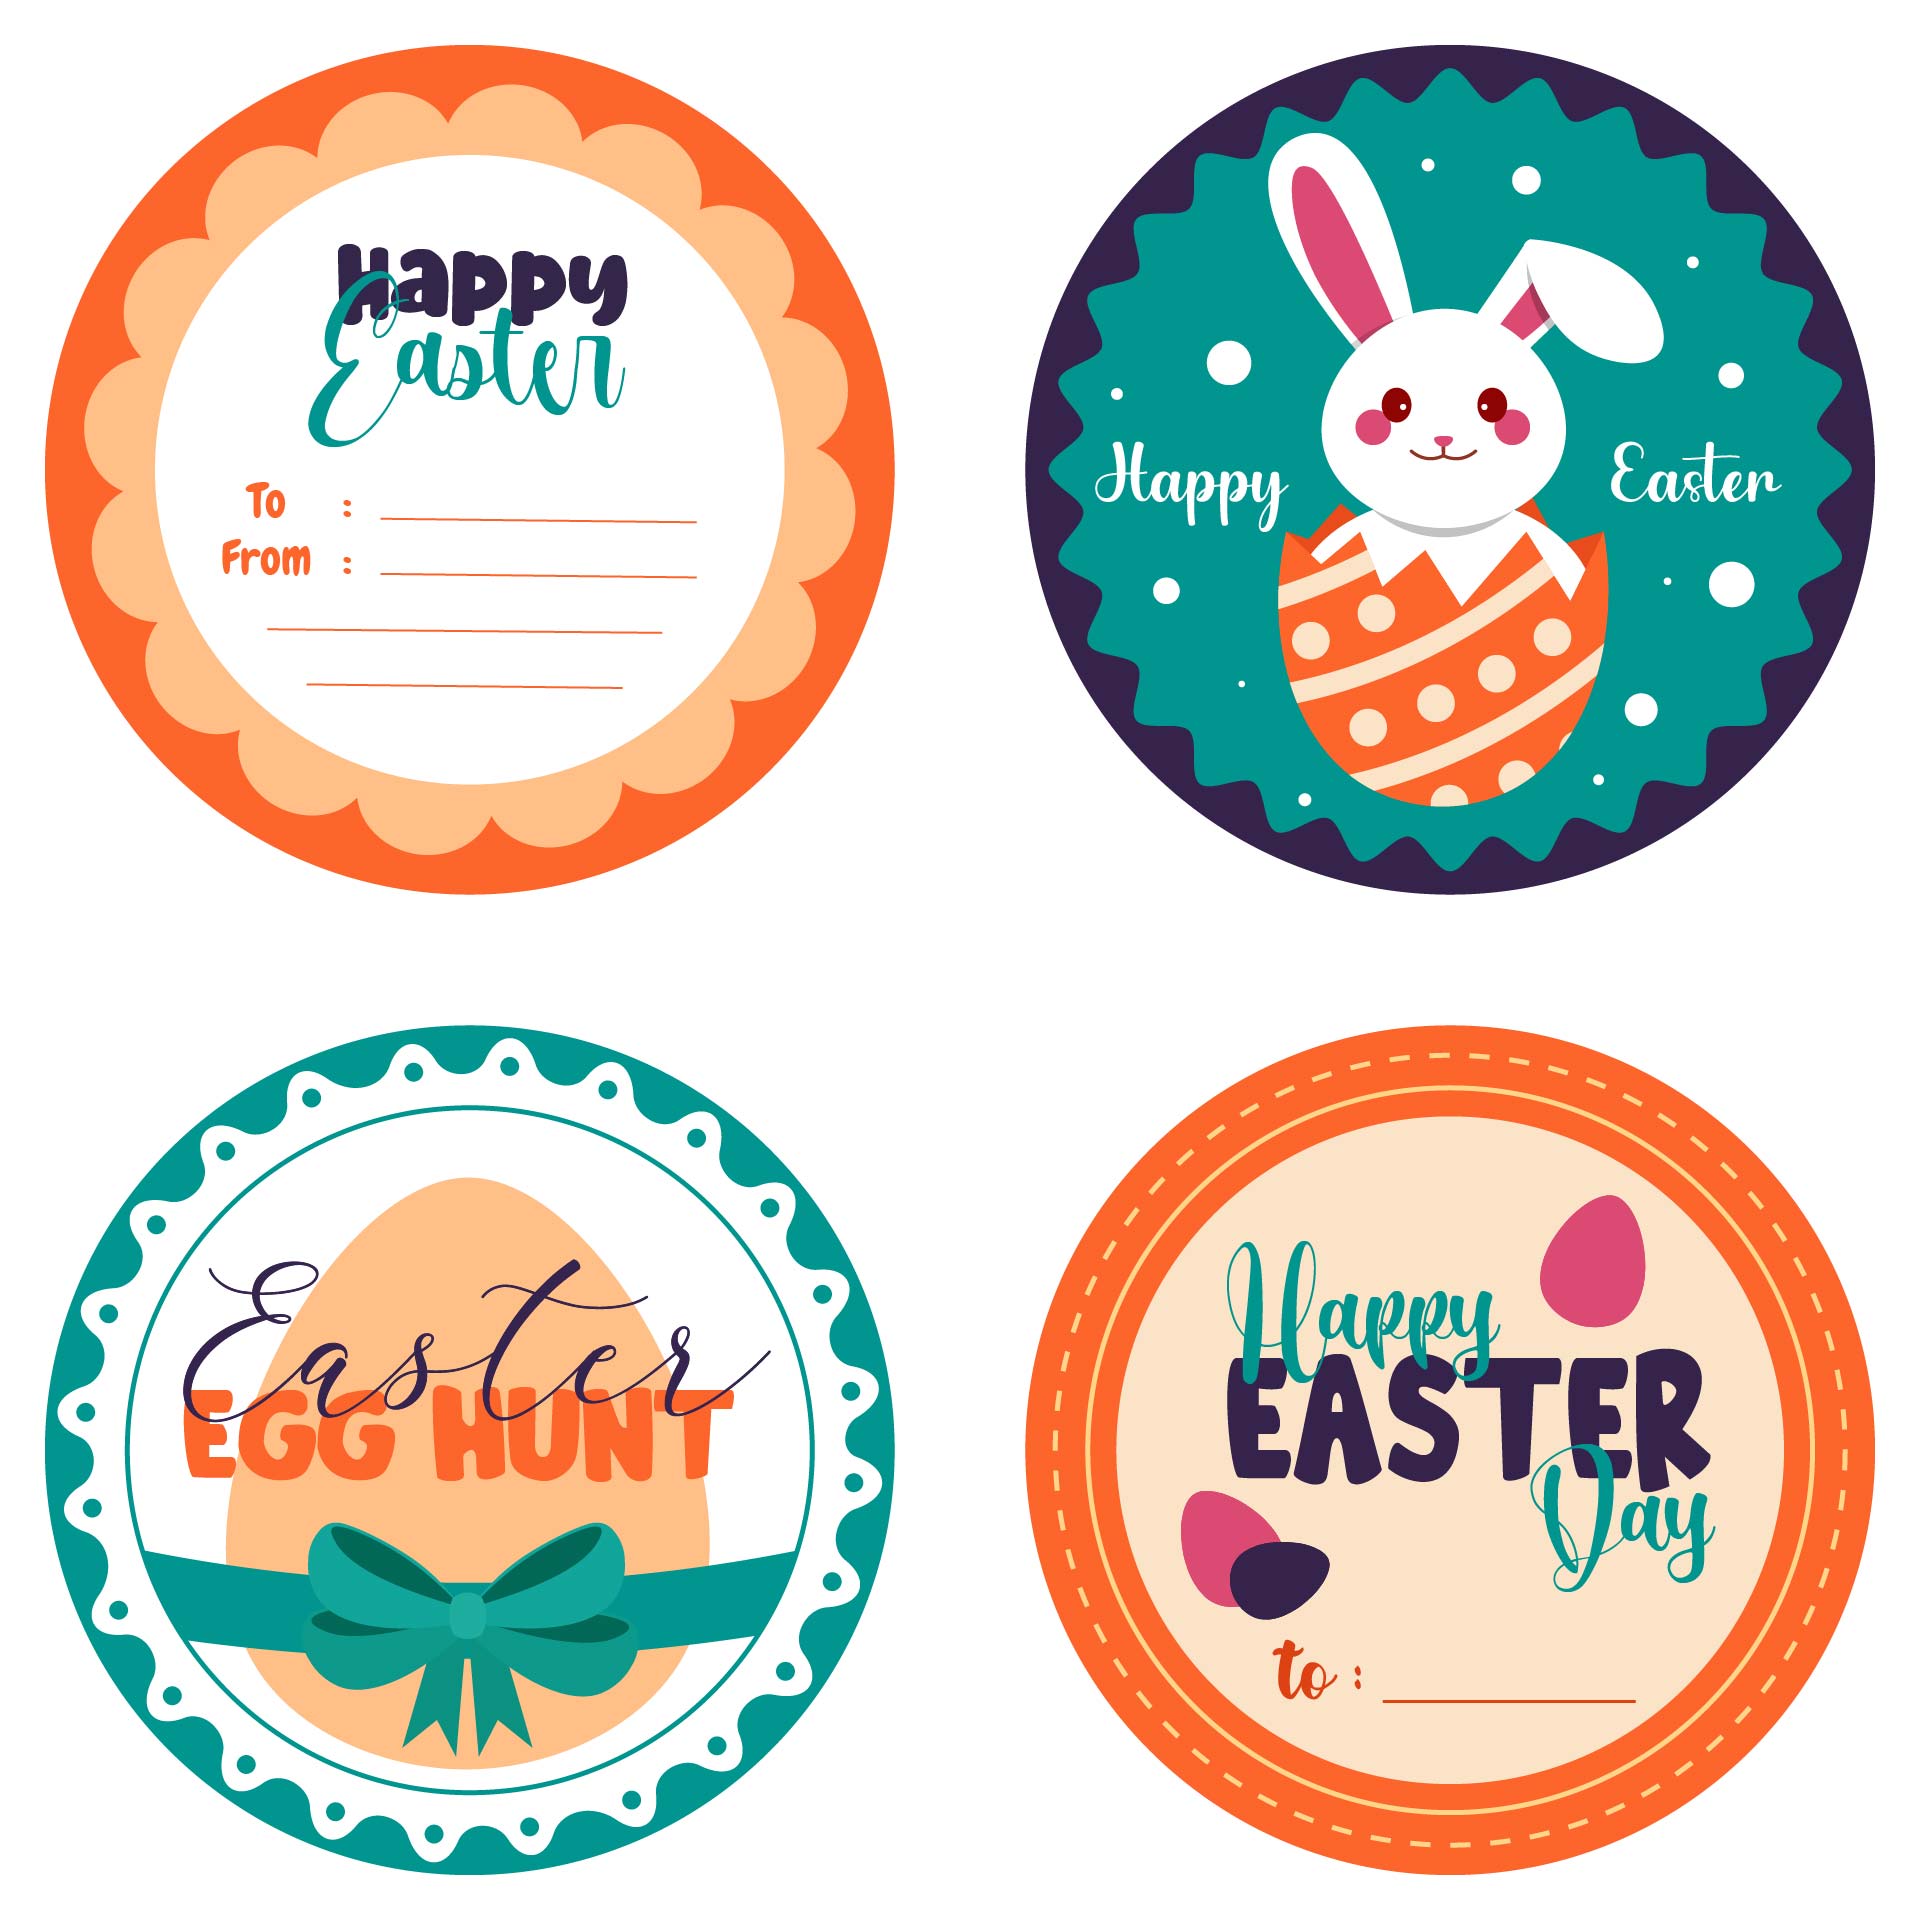 4 Best Images of Happy Easter Gift Tags Free Printables Free